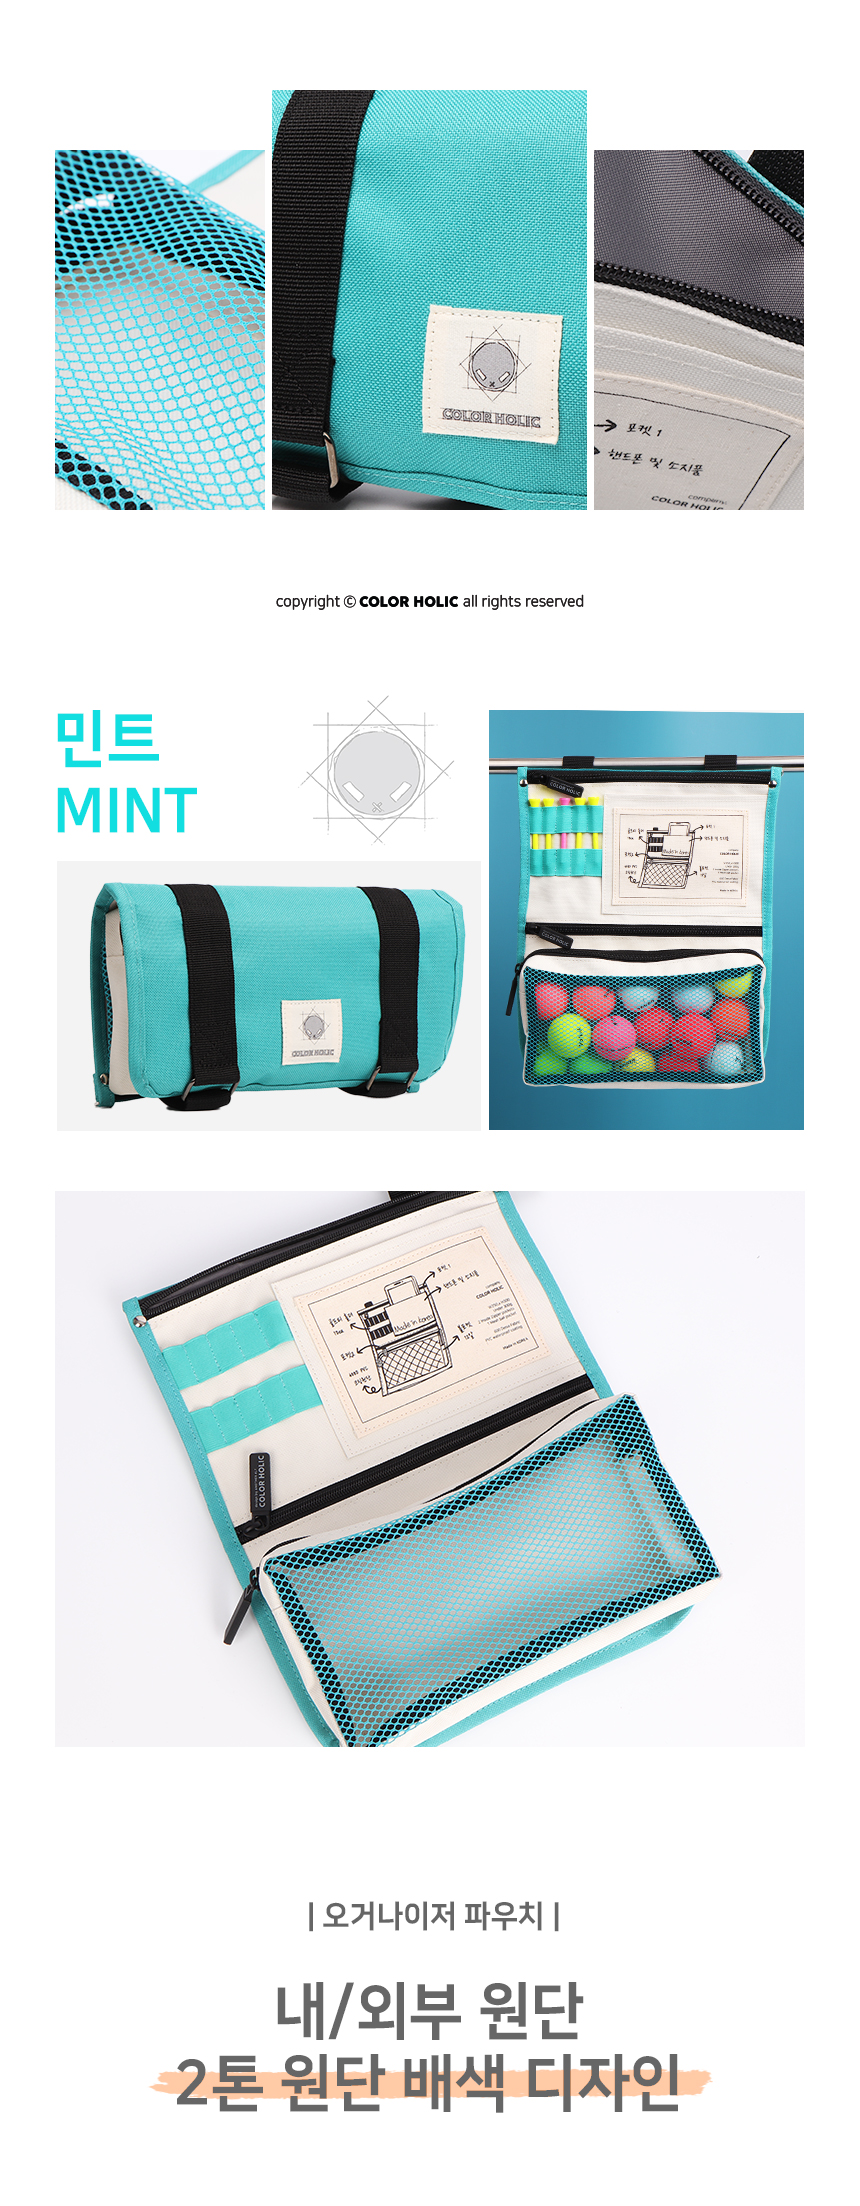 colorholic_golfcart_organizer_pouch_rok_09_page_title_story_box0.jpg